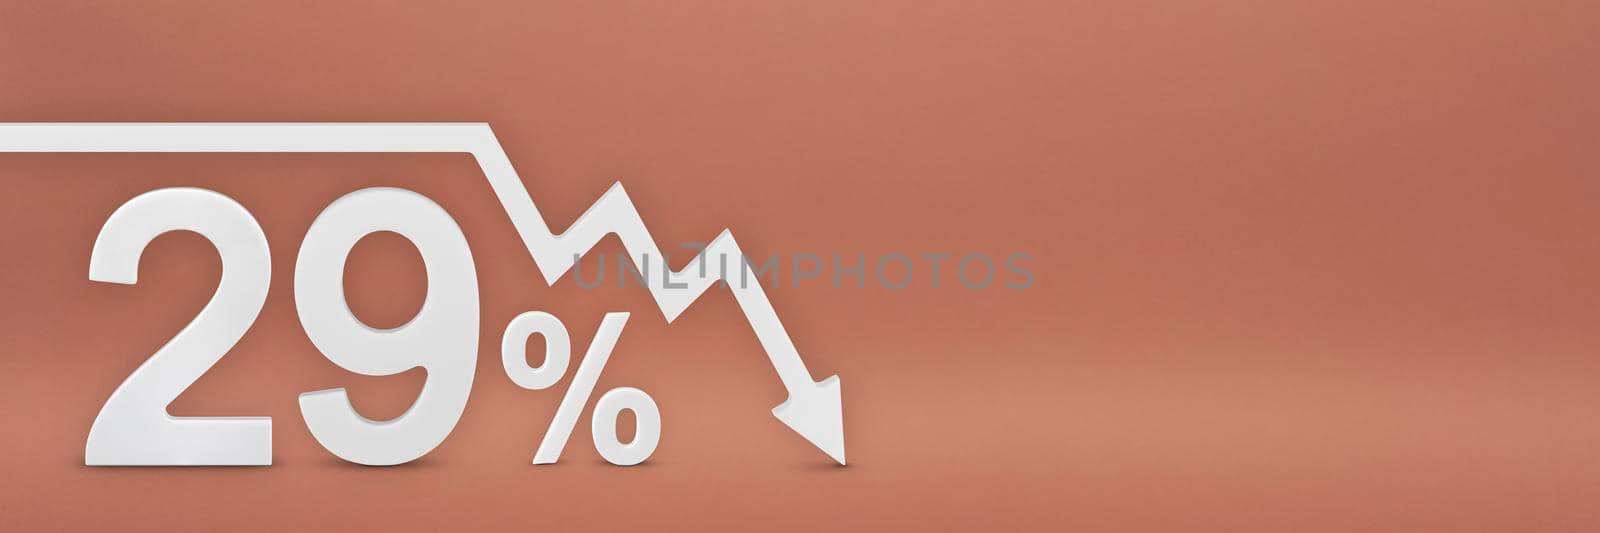 twenty-nine percent, the arrow on the graph is pointing down. Stock market crash, bear market, inflation.Economic collapse, collapse of stocks.3d banner,29 percent discount sign on a red background